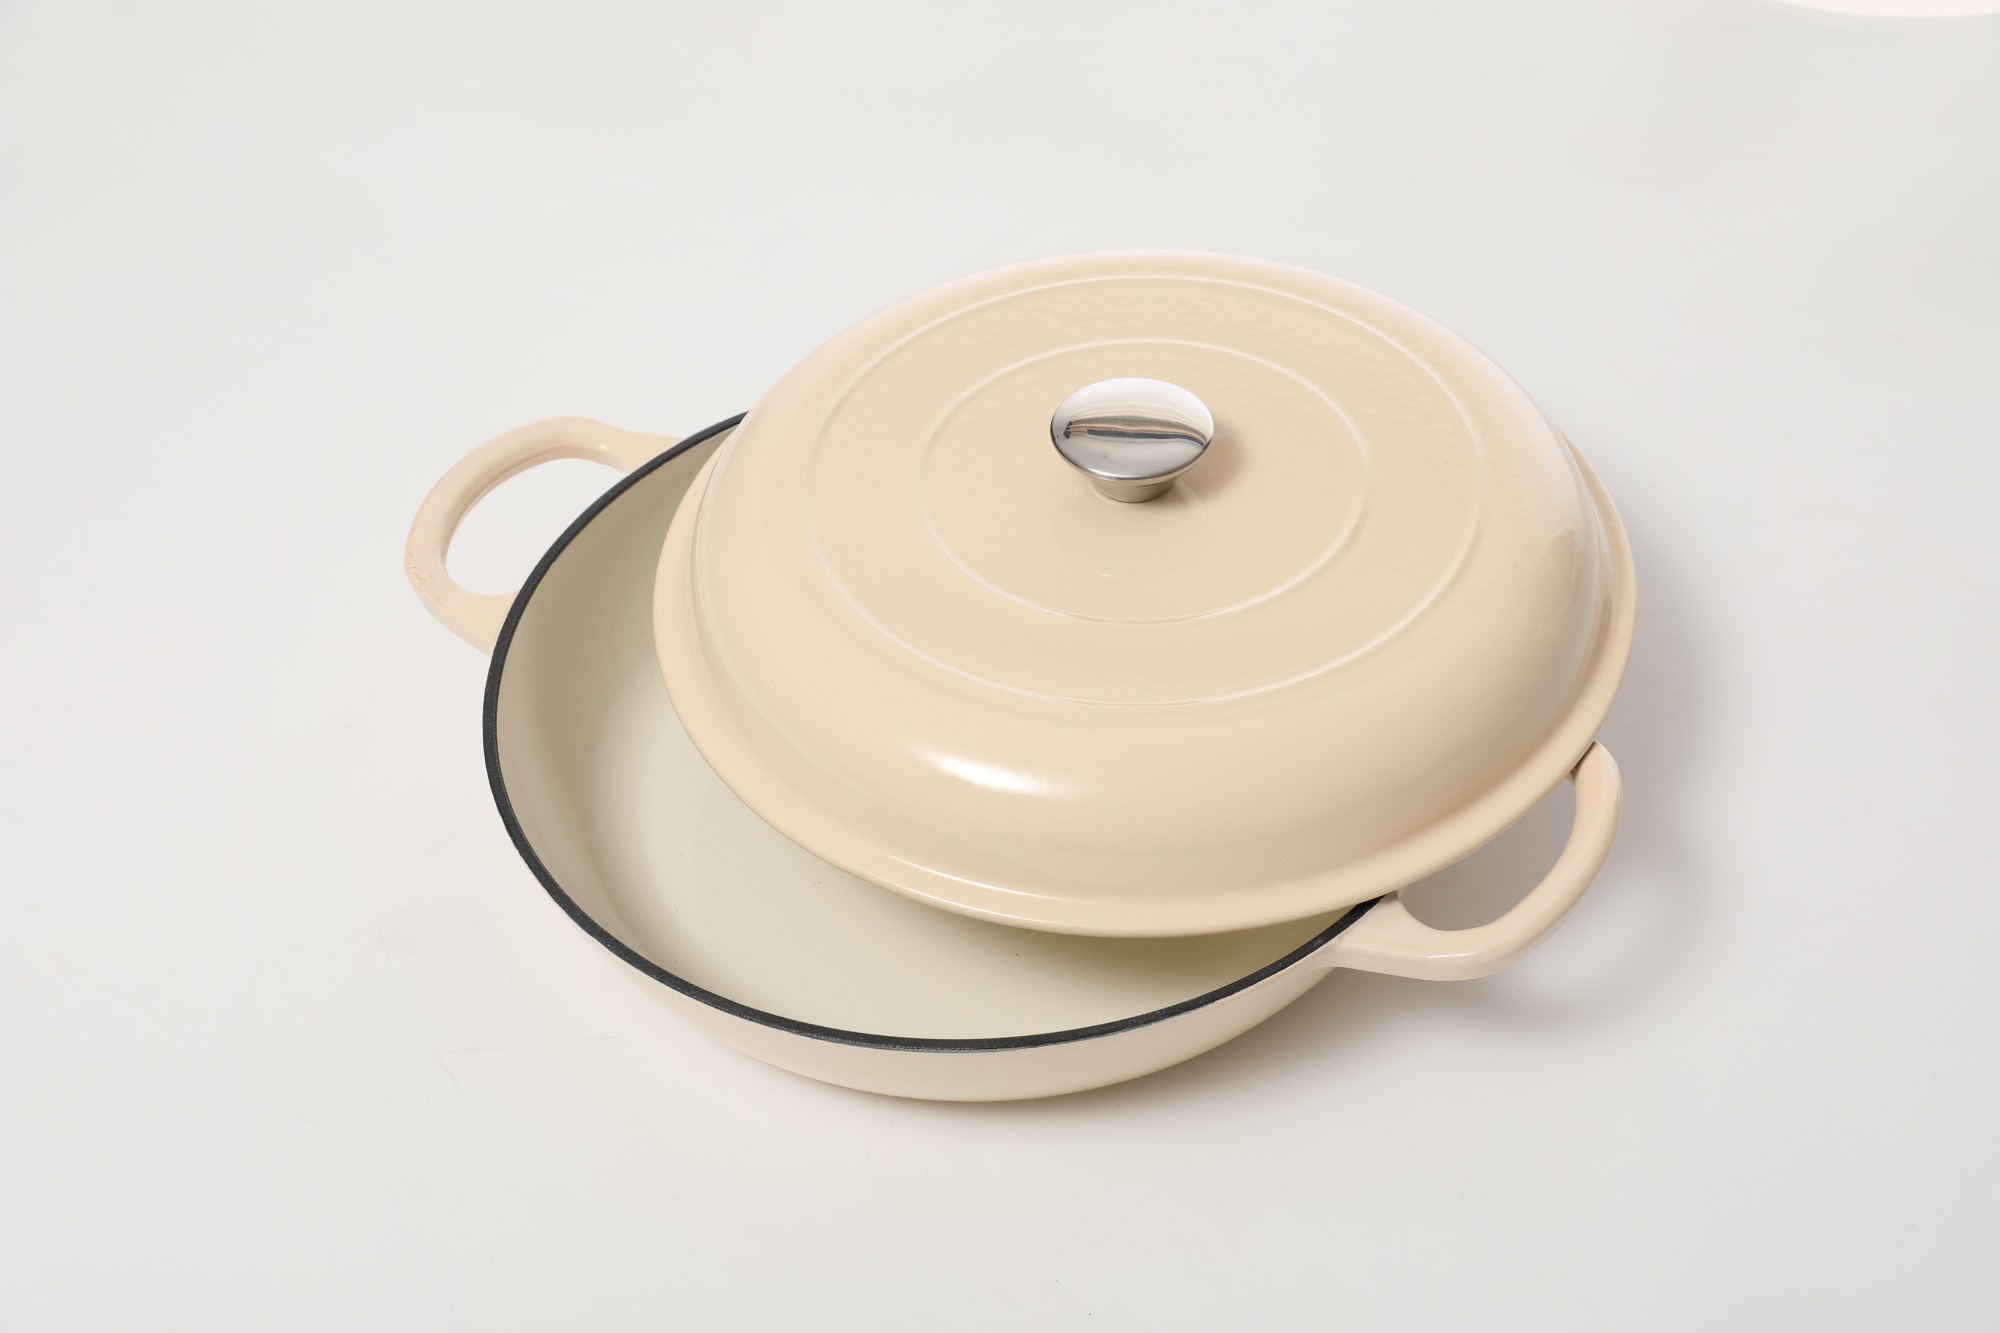 HAWOK Cast Iron and enamel cookware